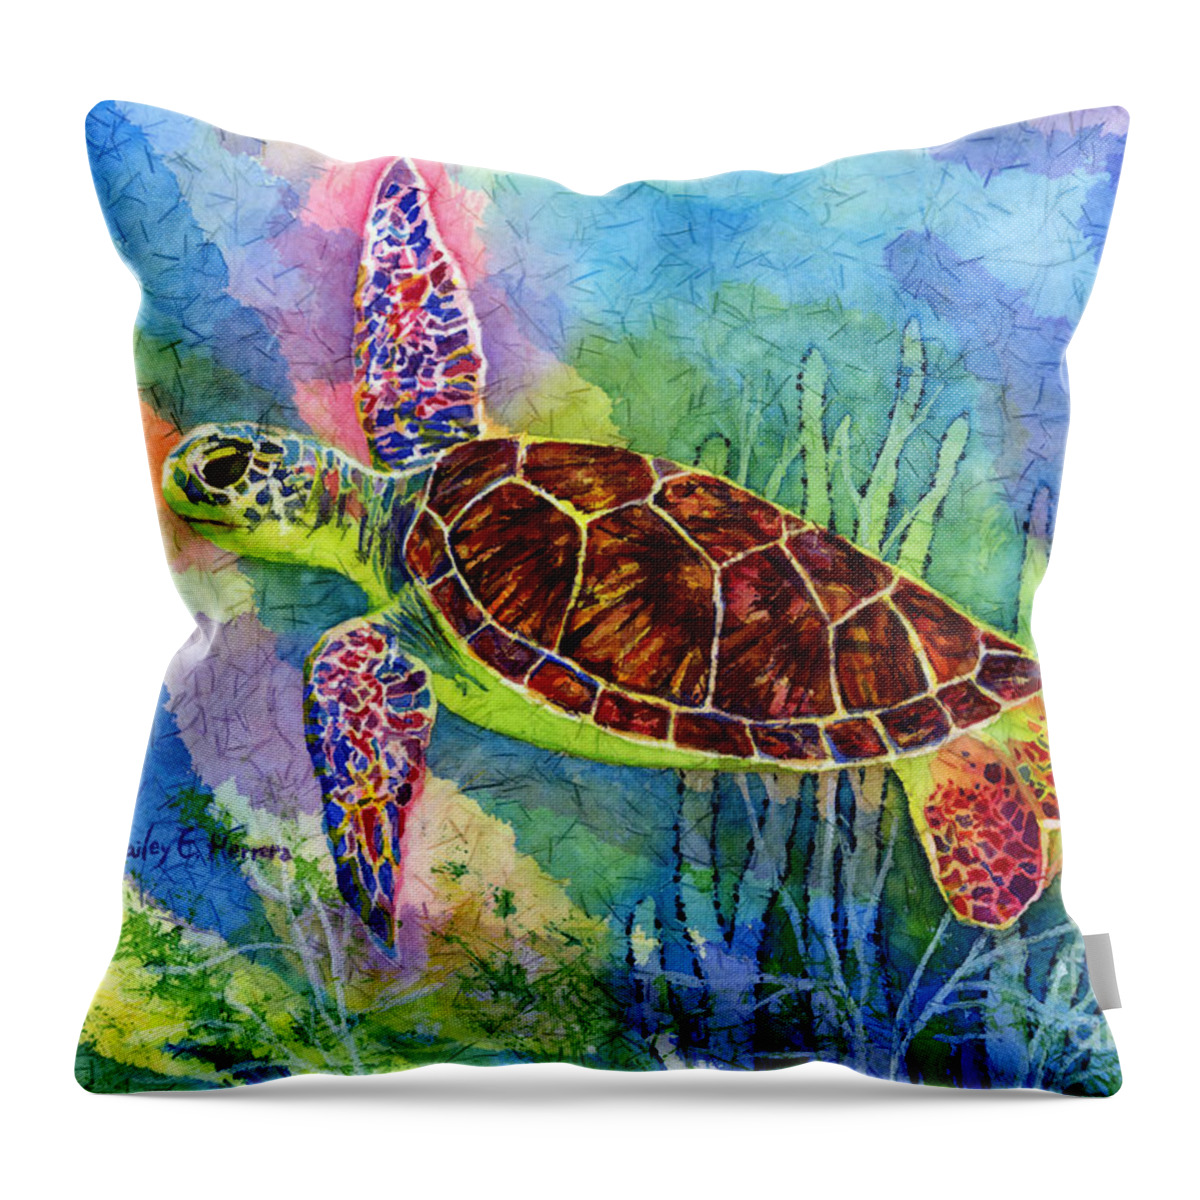 Turtle Throw Pillow featuring the painting Sea Turtle by Hailey E Herrera